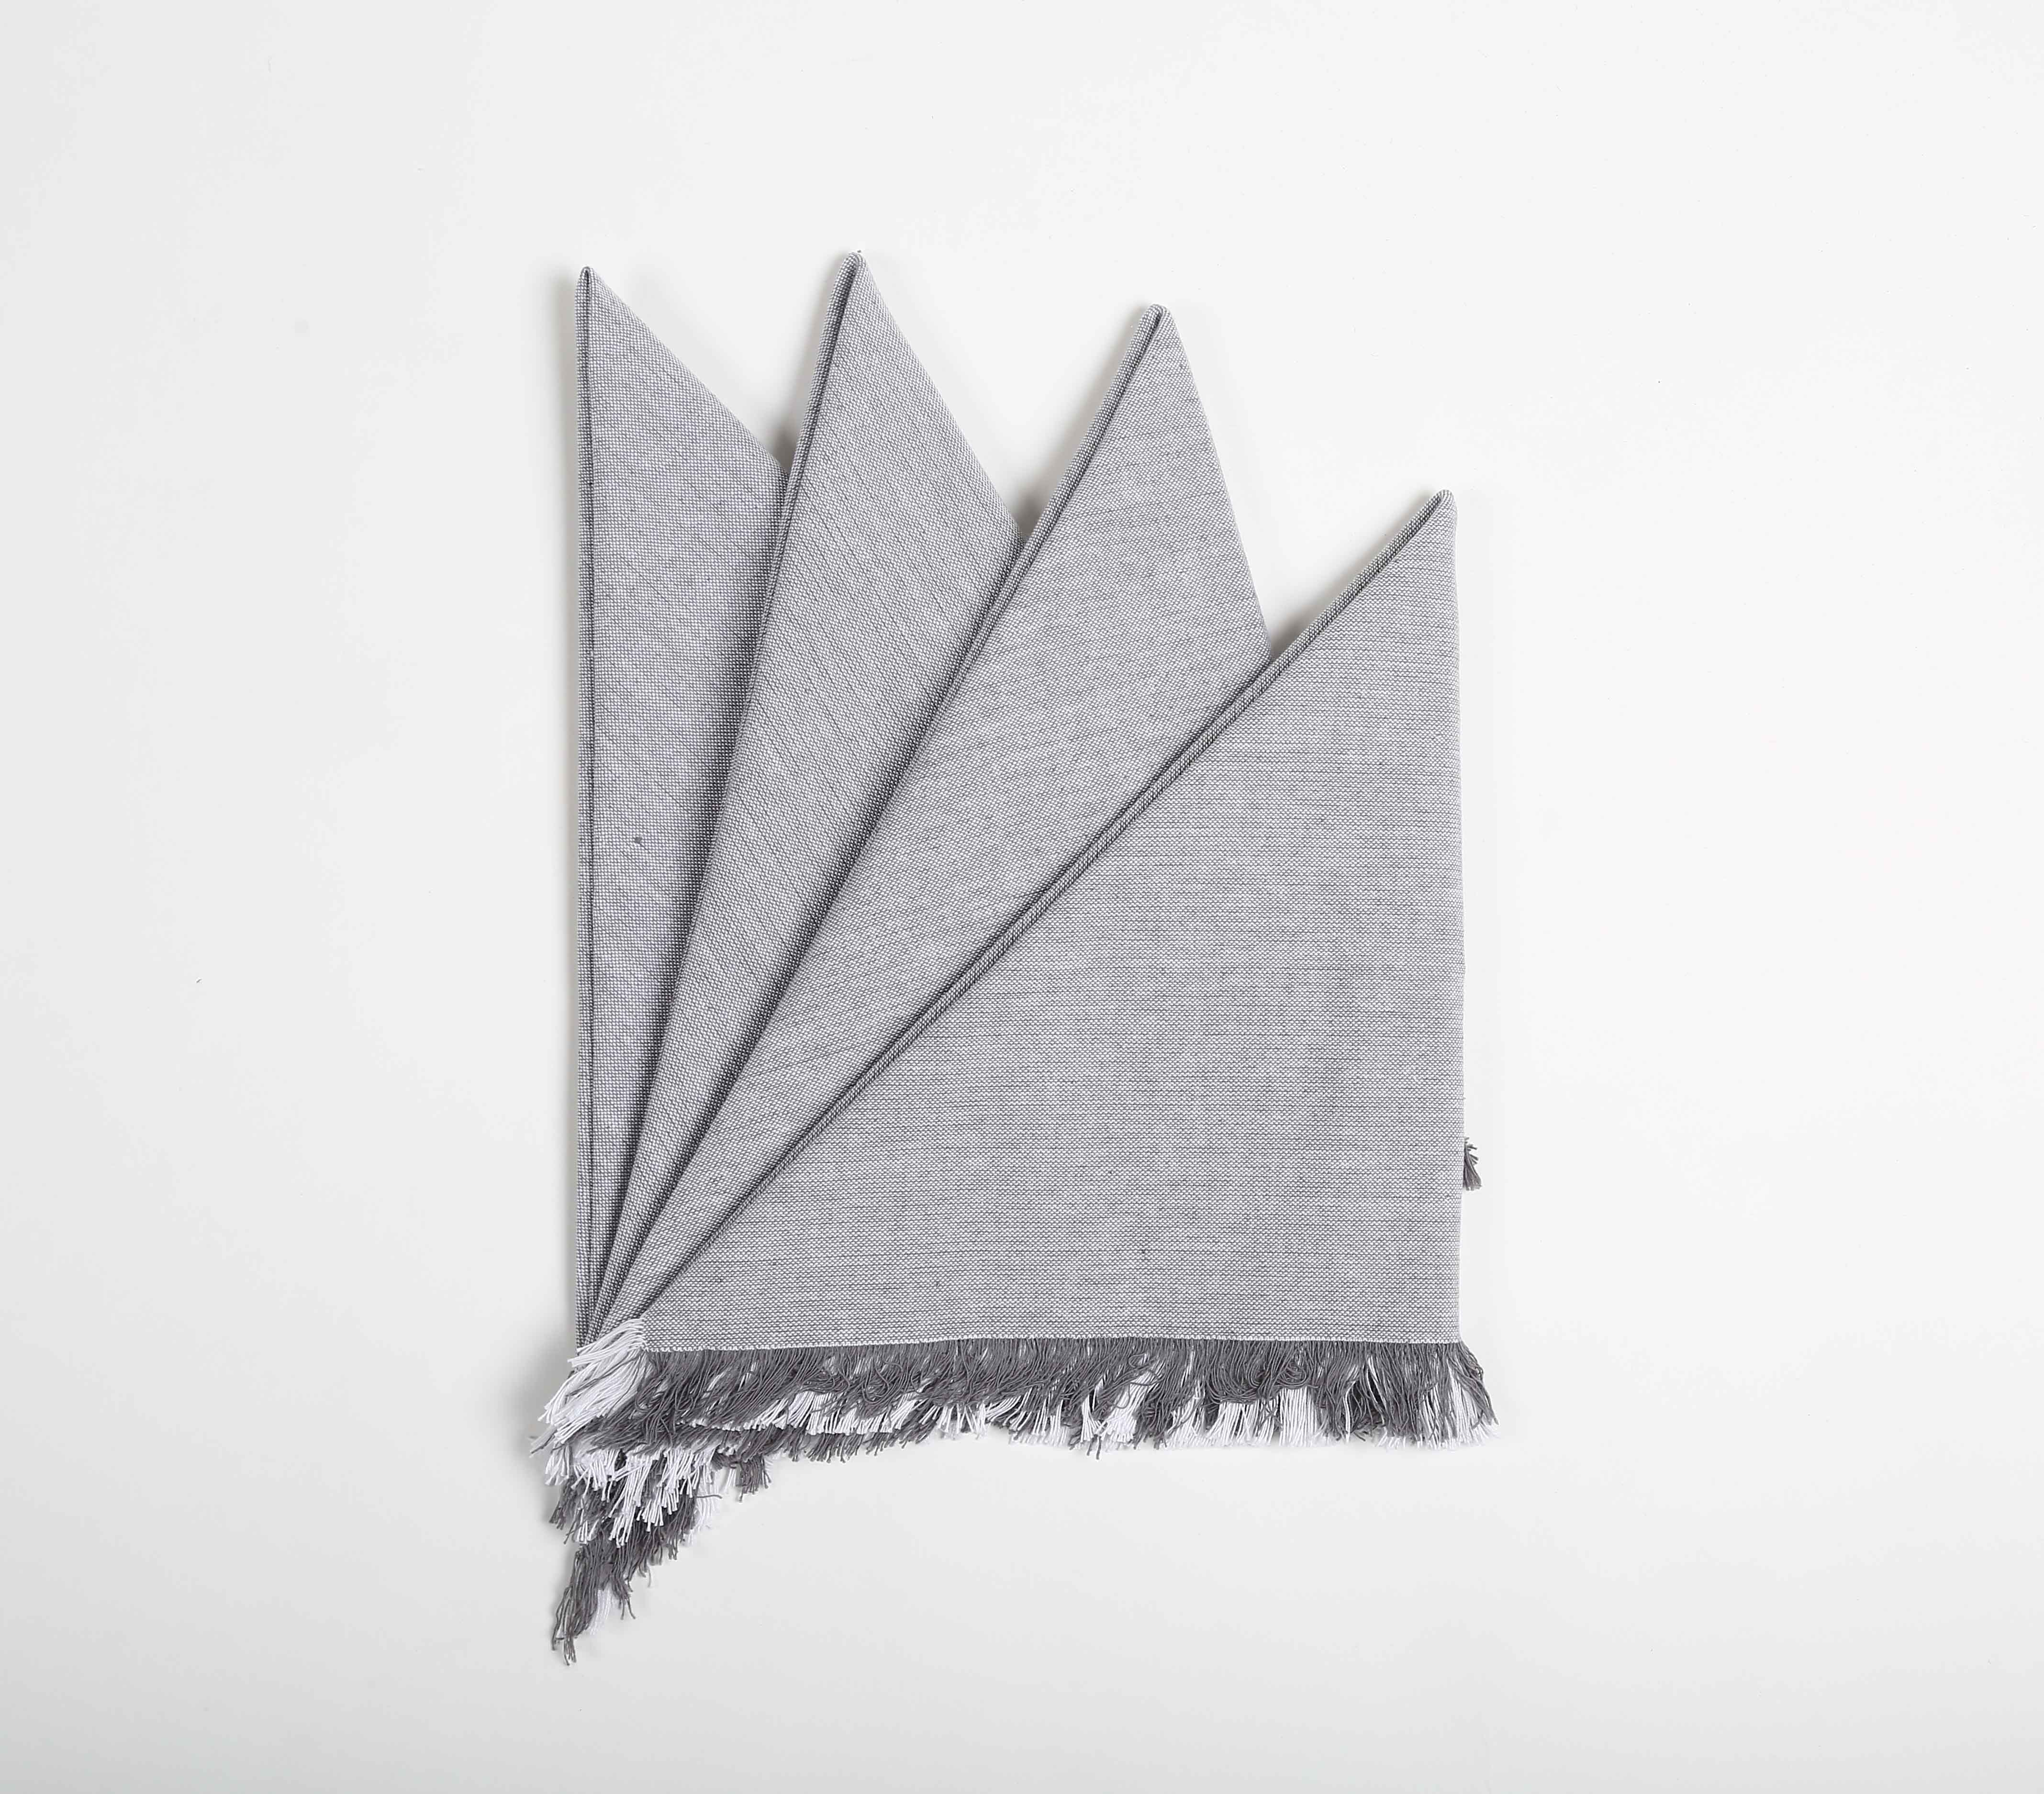 Muted Grey Cotton Table Napkins (Set of 4), 18 Inch- 2 SETS